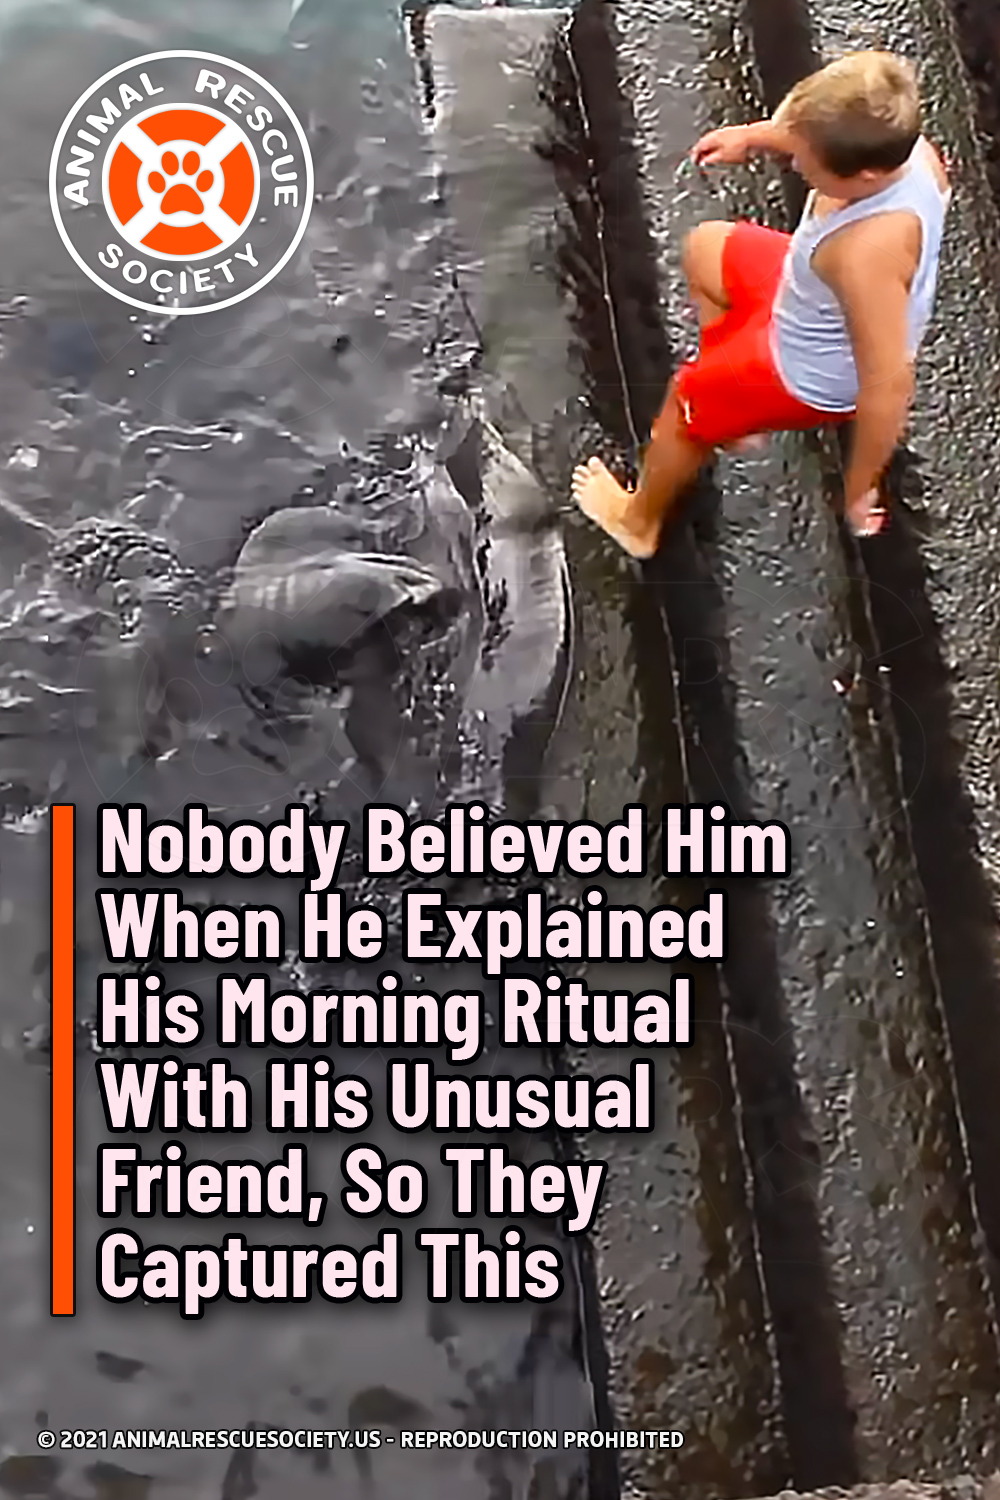 Nobody Believed Him When He Explained His Morning Ritual With His Unusual Friend, So They Captured This